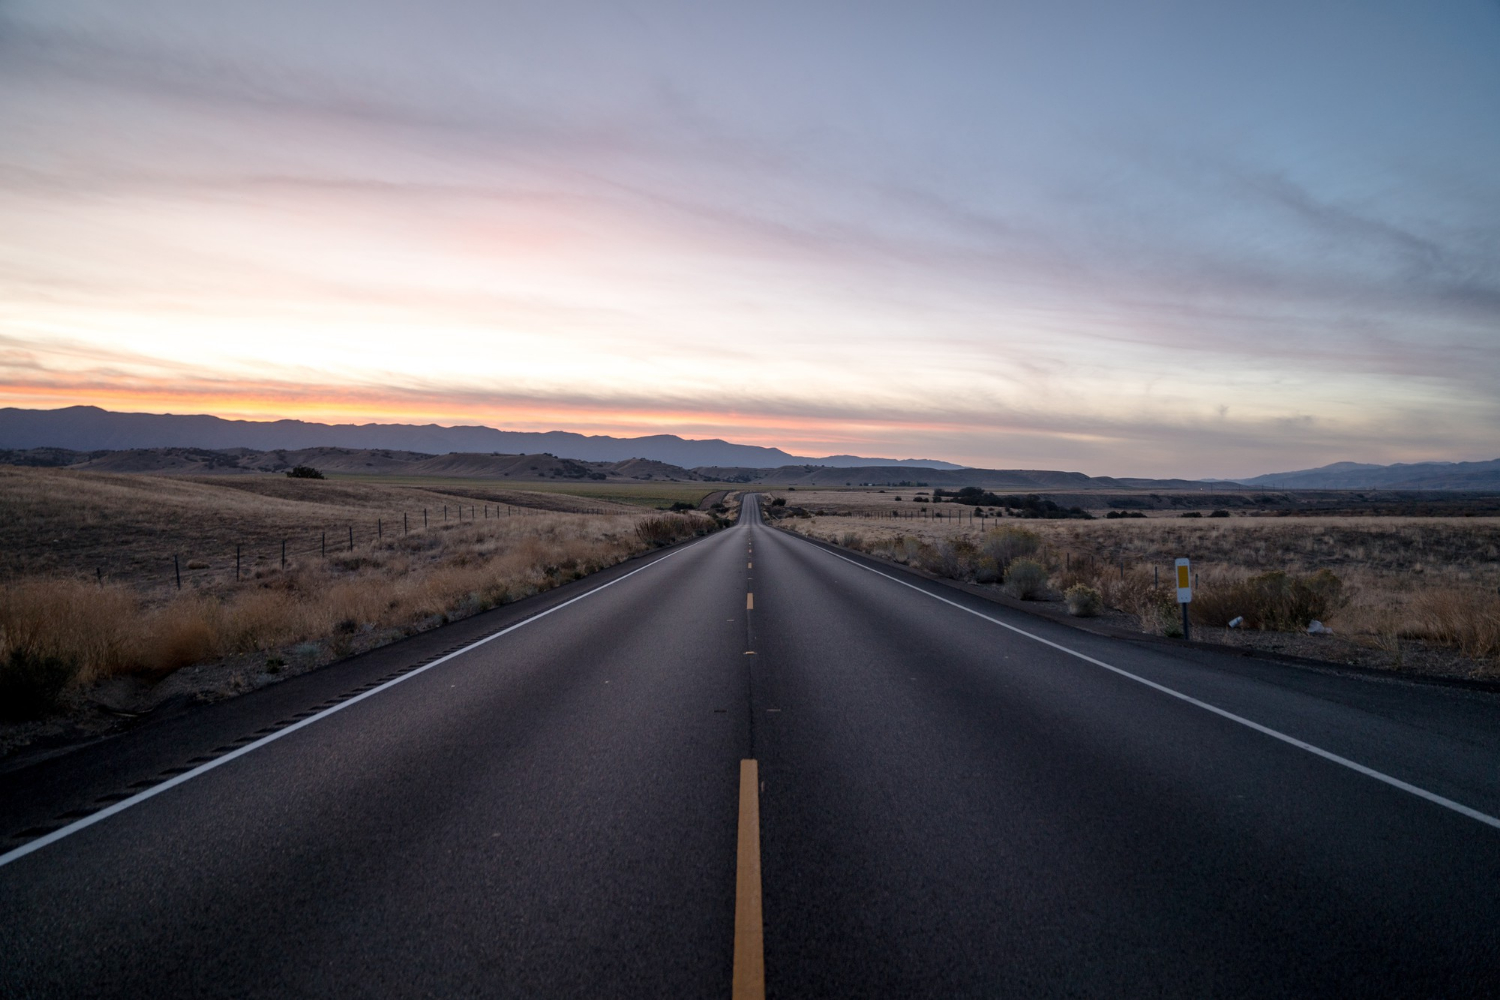 https://logitydispatch.com/wp-content/uploads/2023/10/shot-highway-road-surrounded-by-dried-grass-fields-sky-during-sunset-1.webp